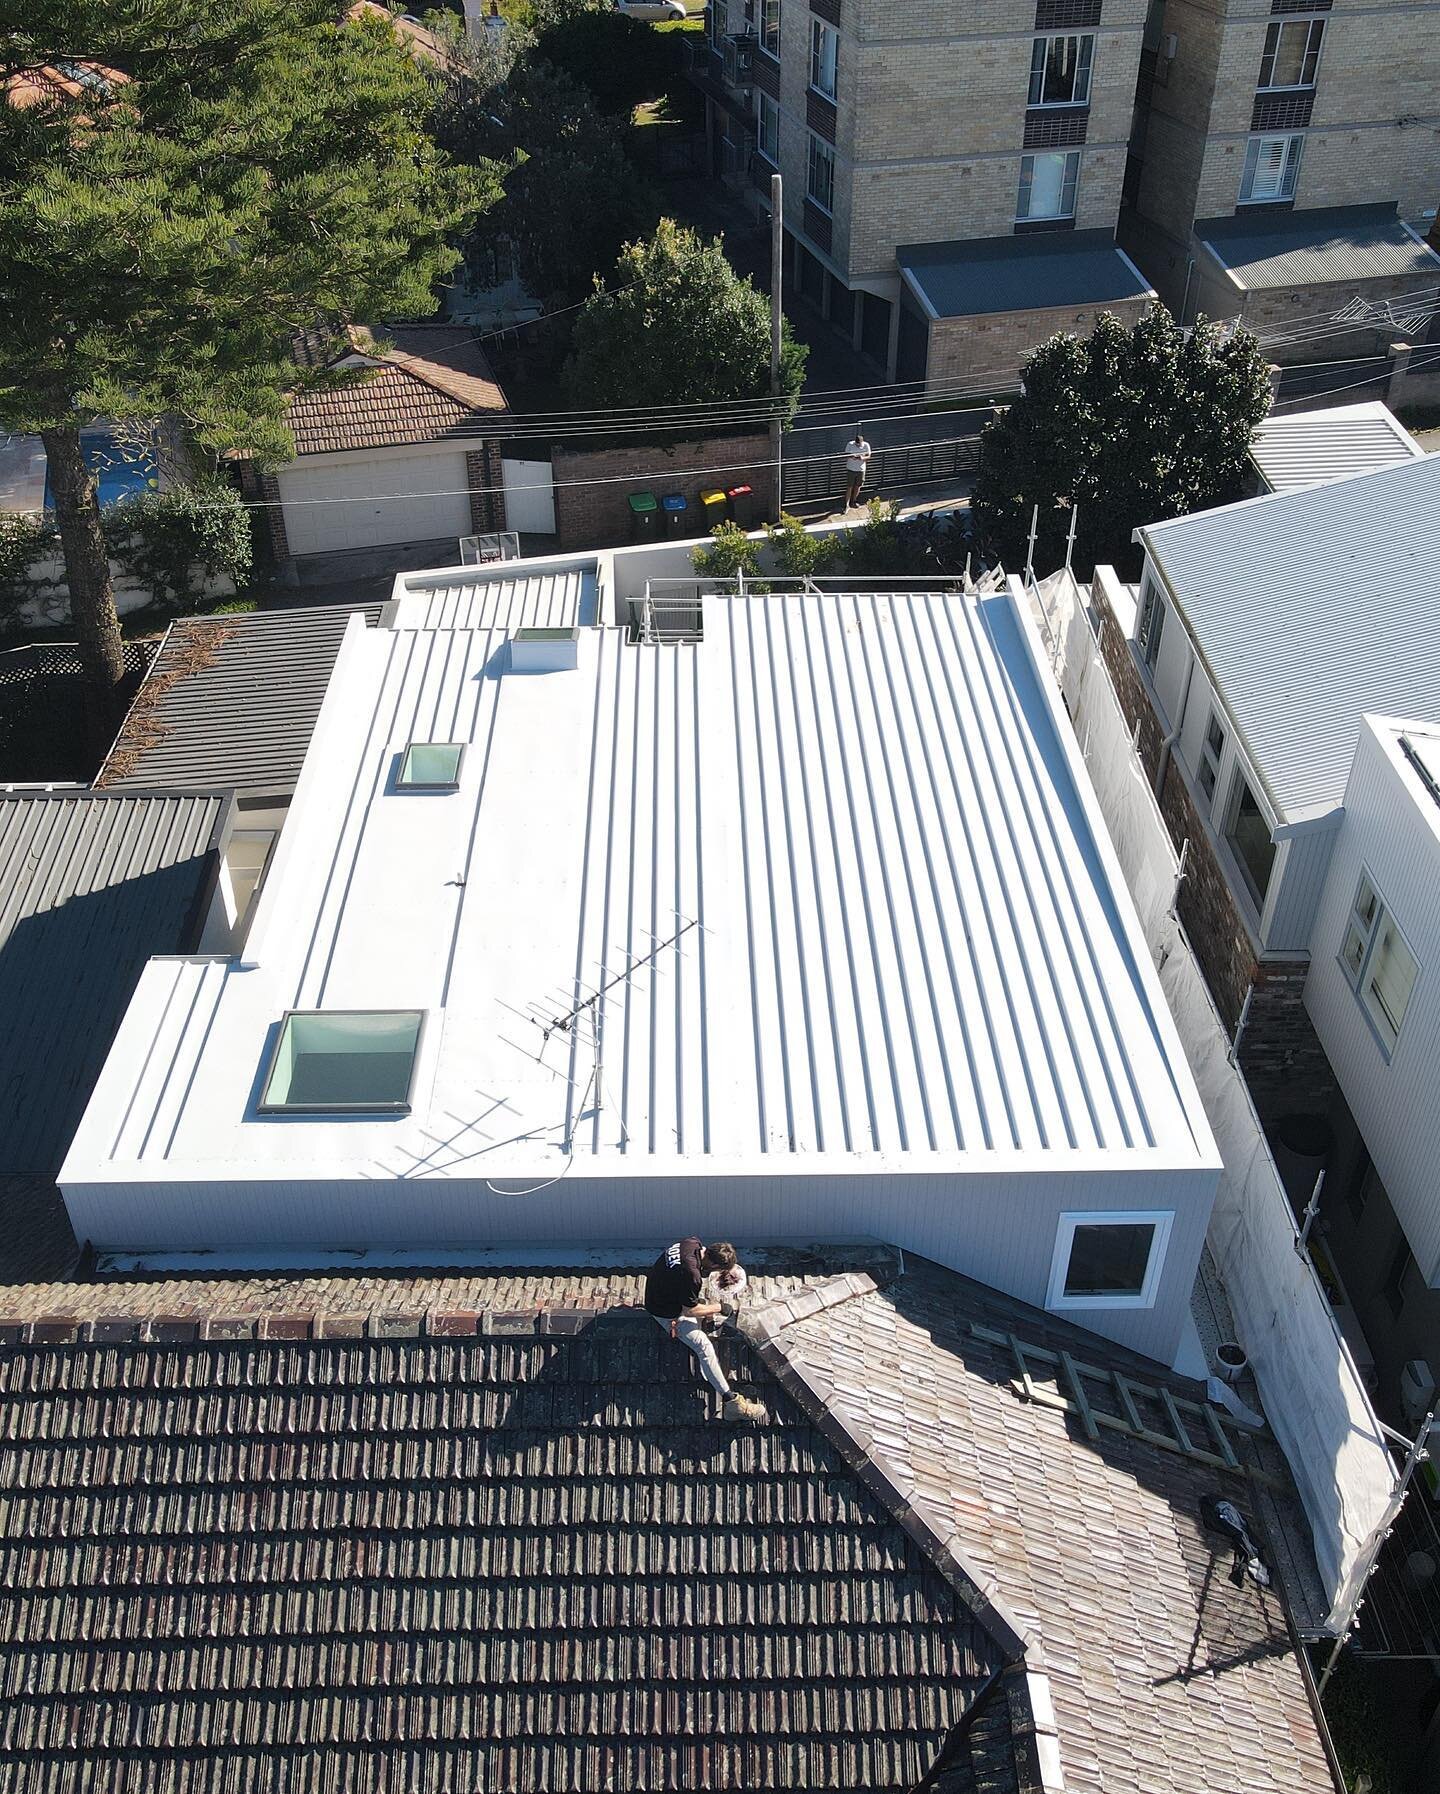 Another quality project completed for @hoekprojects .
This roof features @lysaght_au kliplok 700 in Shale grey and 3 @veluxaustralia skylights.
#roof #roofer #roofing #construction #skylight #kliplok #gutter #colorbond #blacklabelroofing